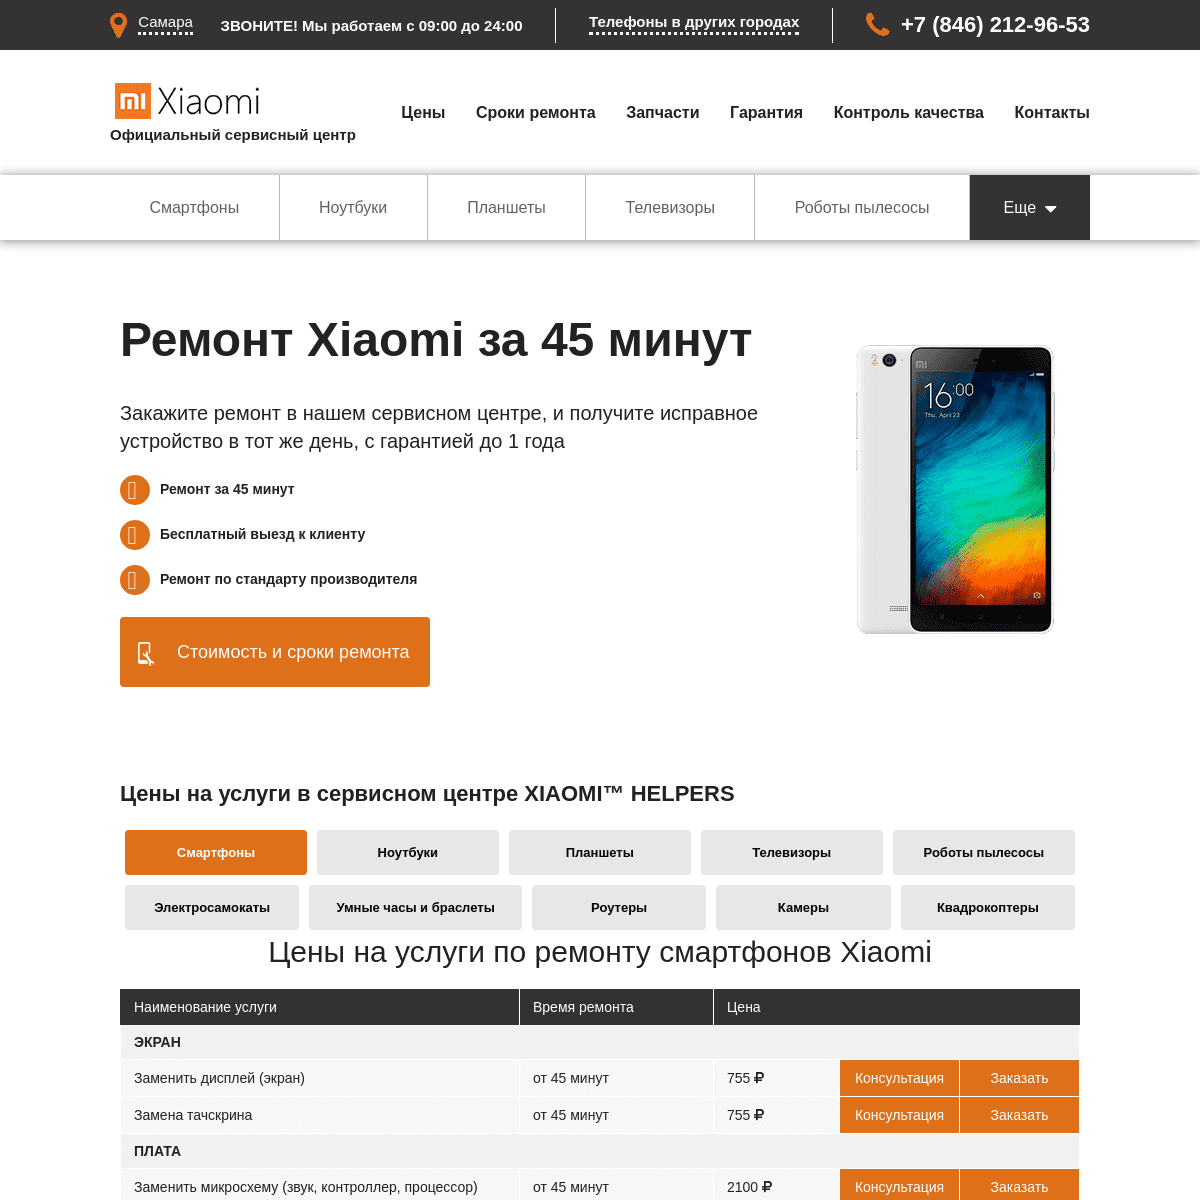 A complete backup of remonts-xiaomi.ru